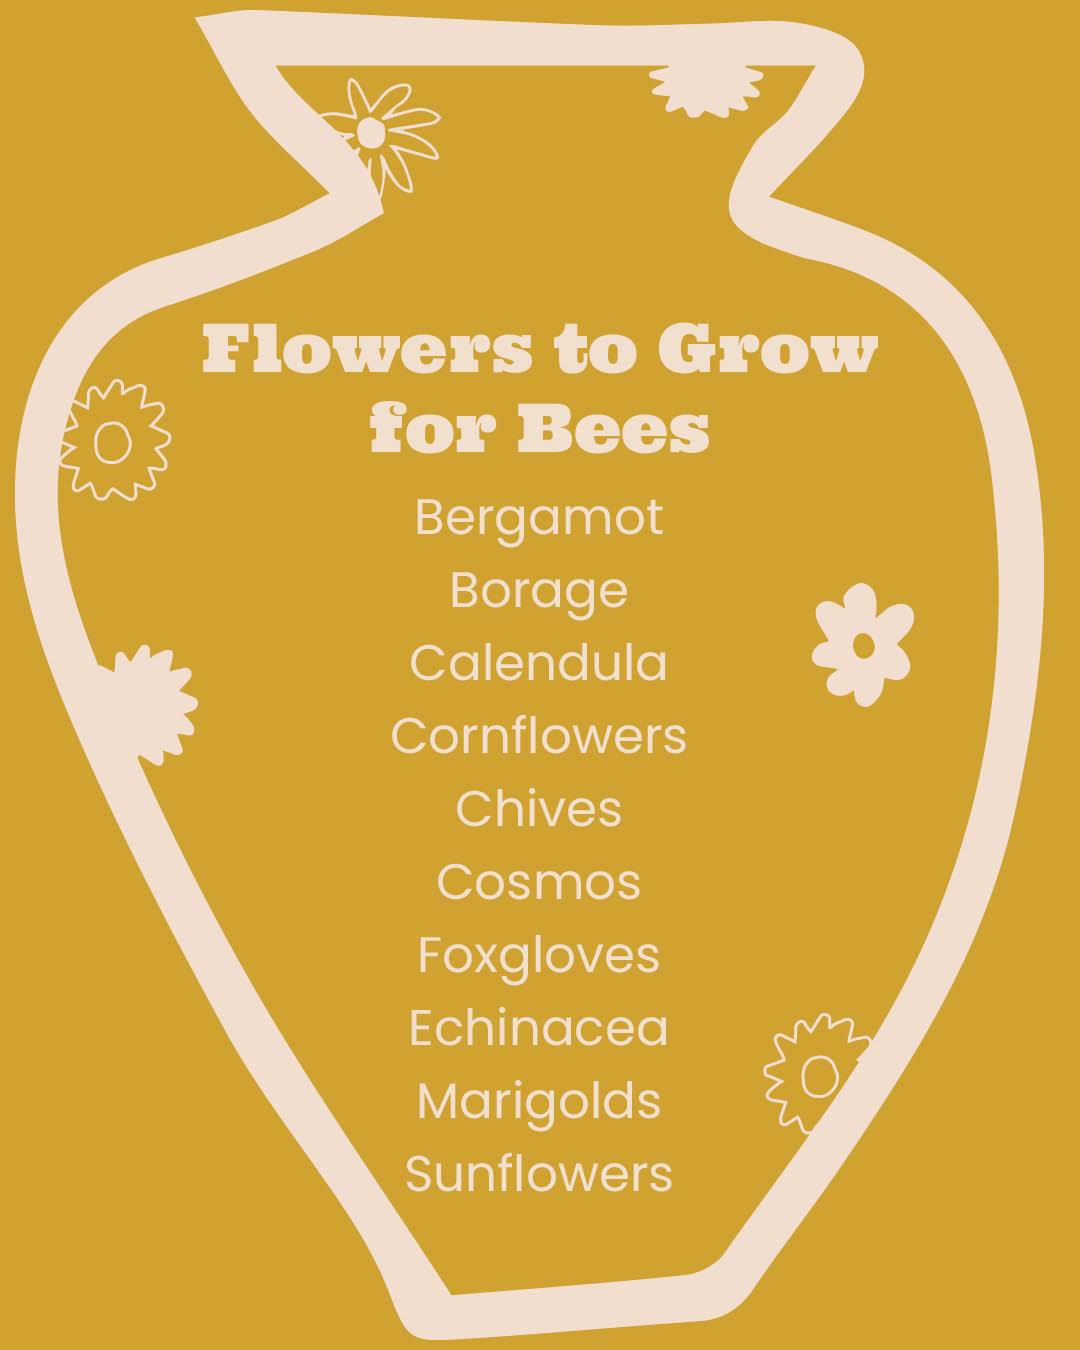 Flowers to Grow for Bees